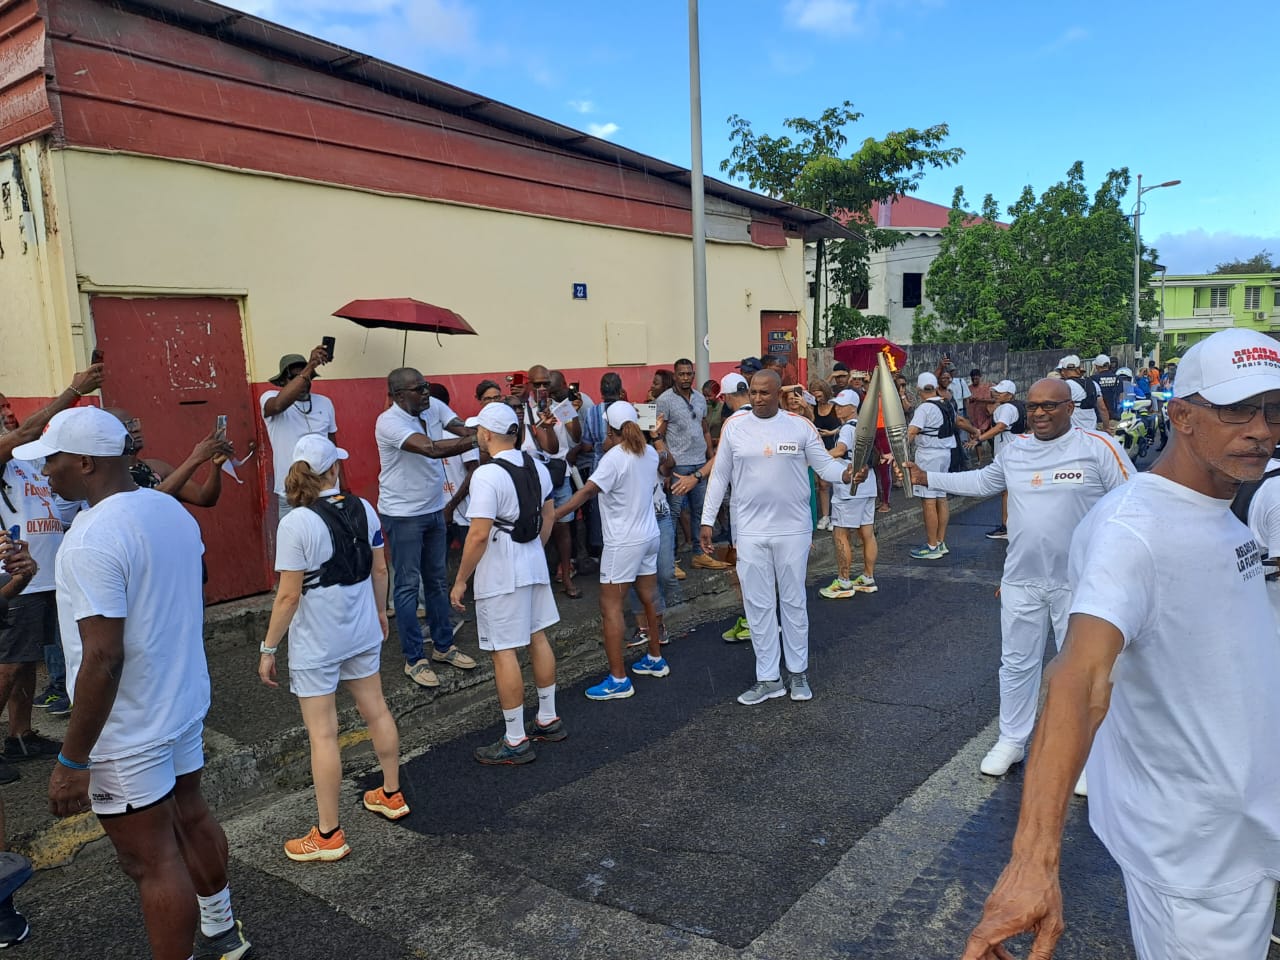 THE OLYMPIC TORCH SHINES IN MARTINIQUE ON ITS WAY TO THE OLYMPIC GAMES IN PARIS 2024